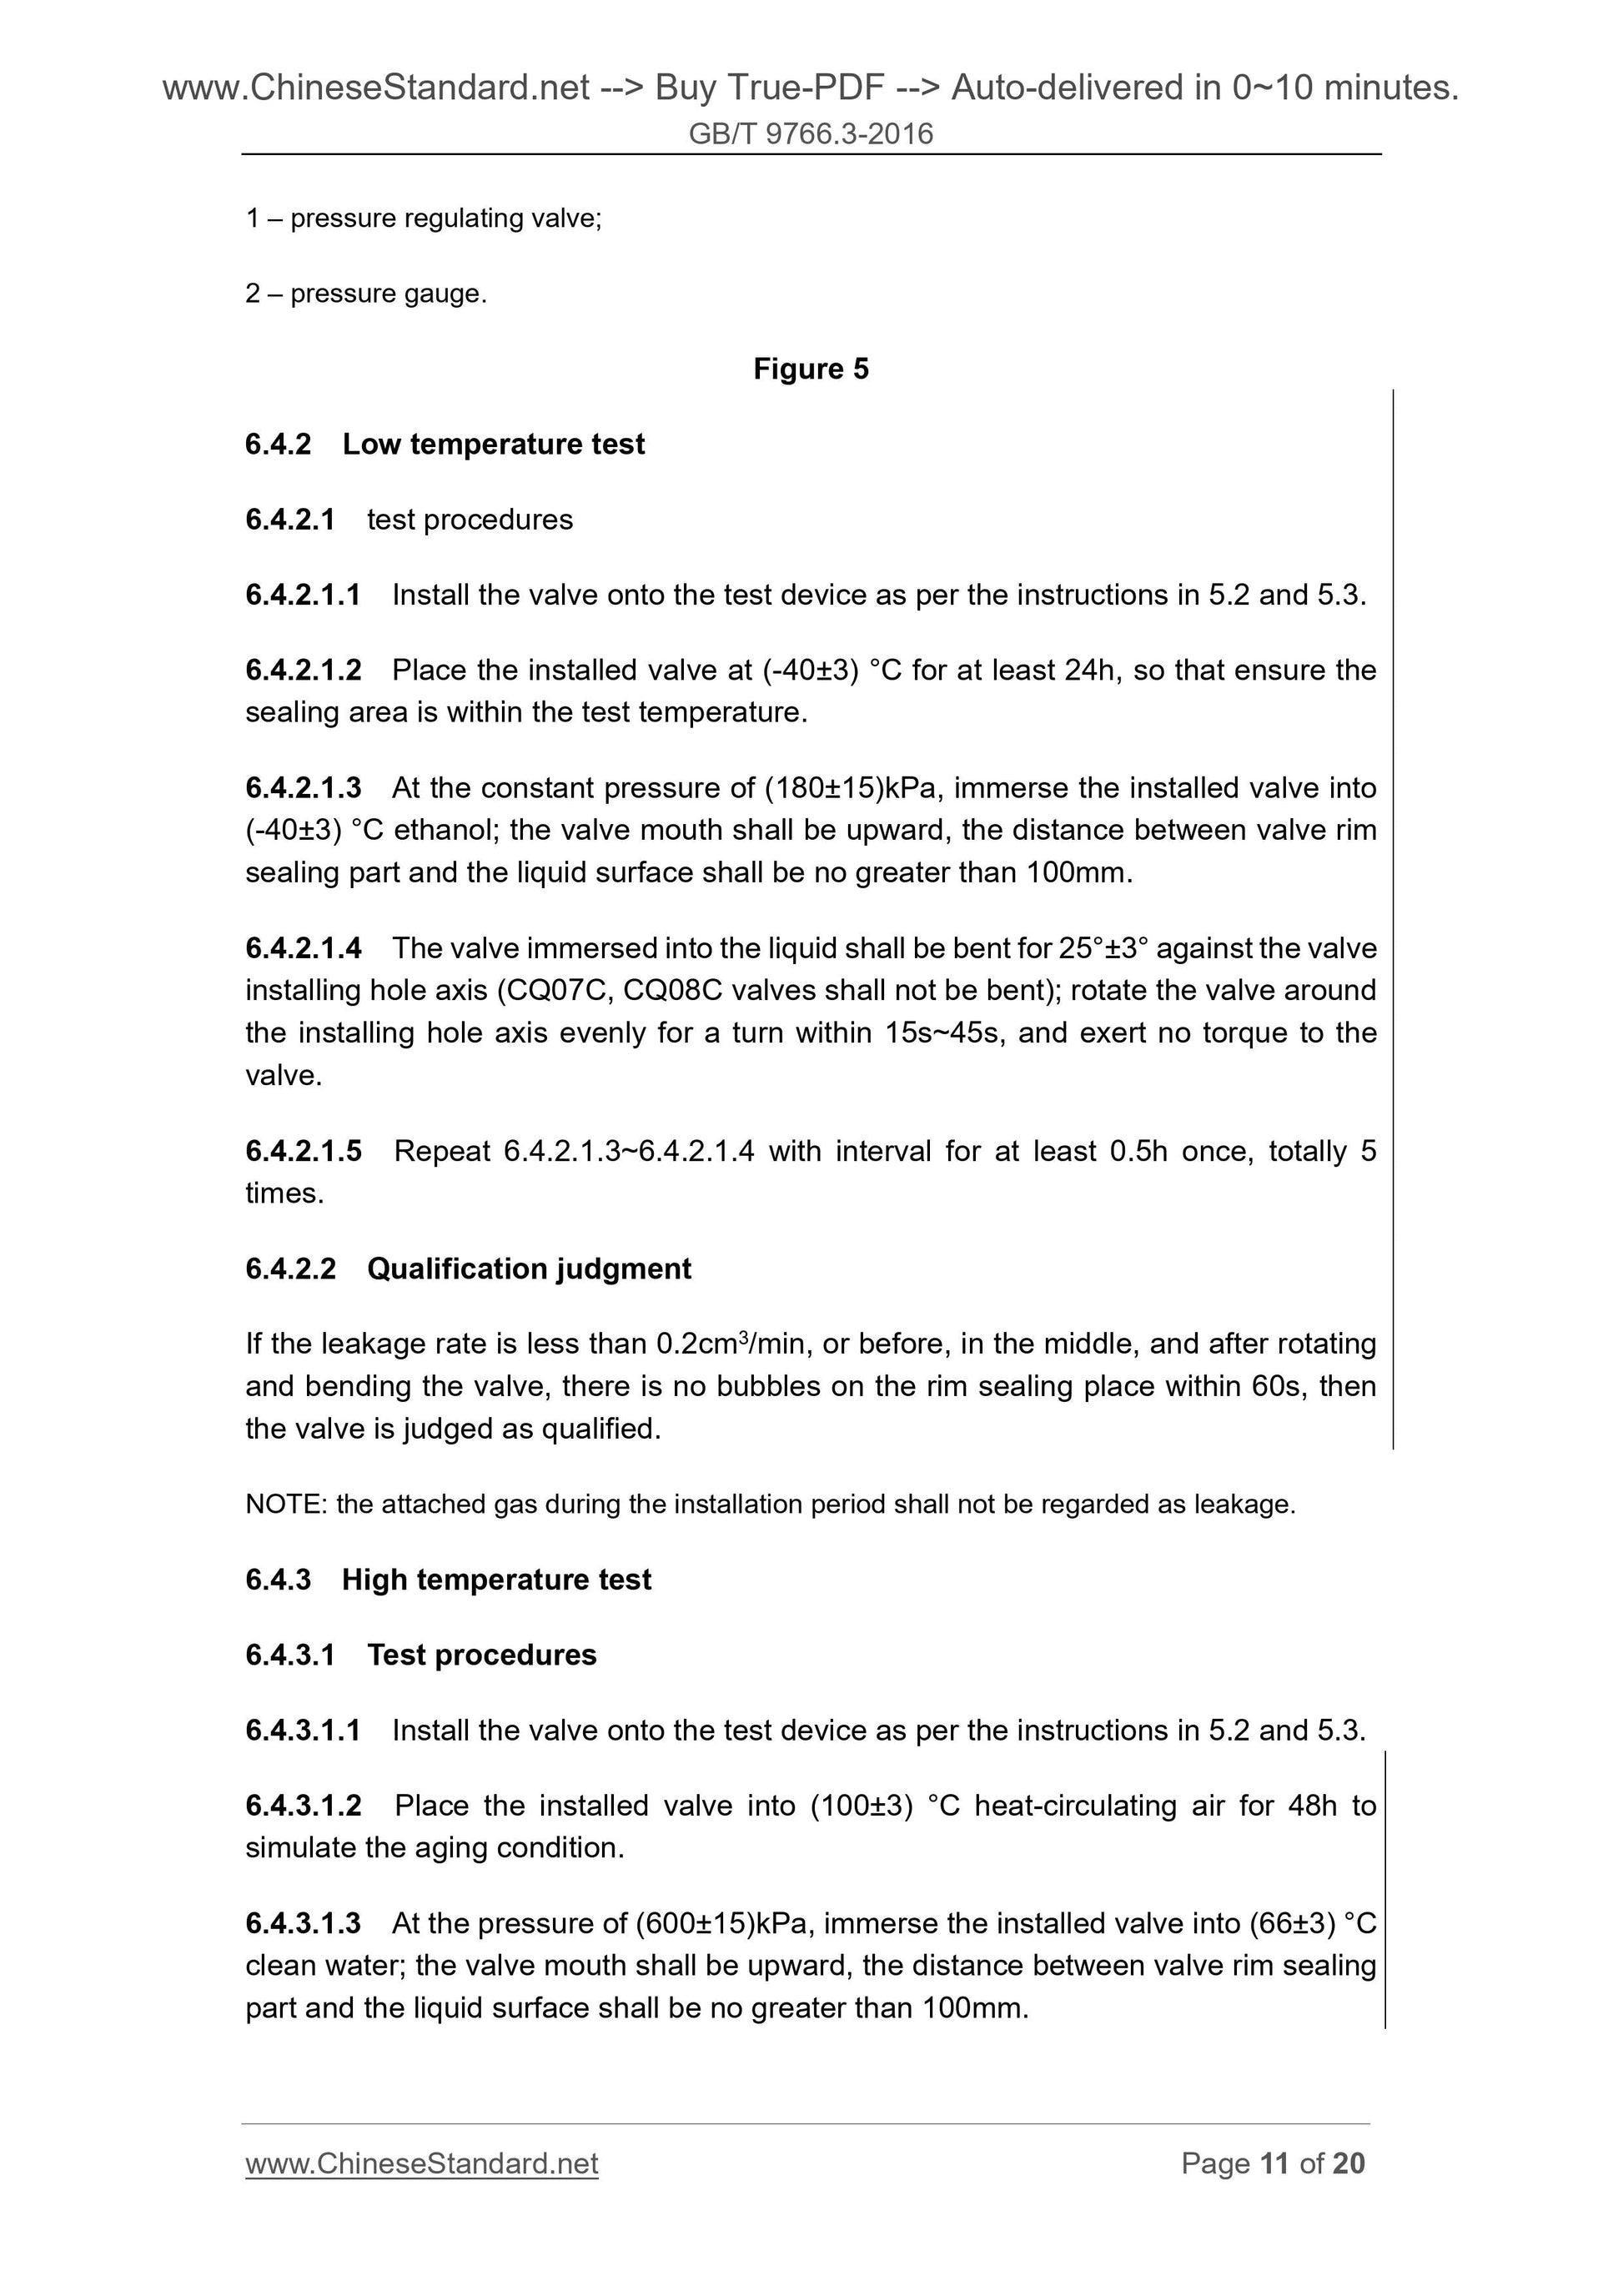 GB/T 9766.3-2016 Page 5